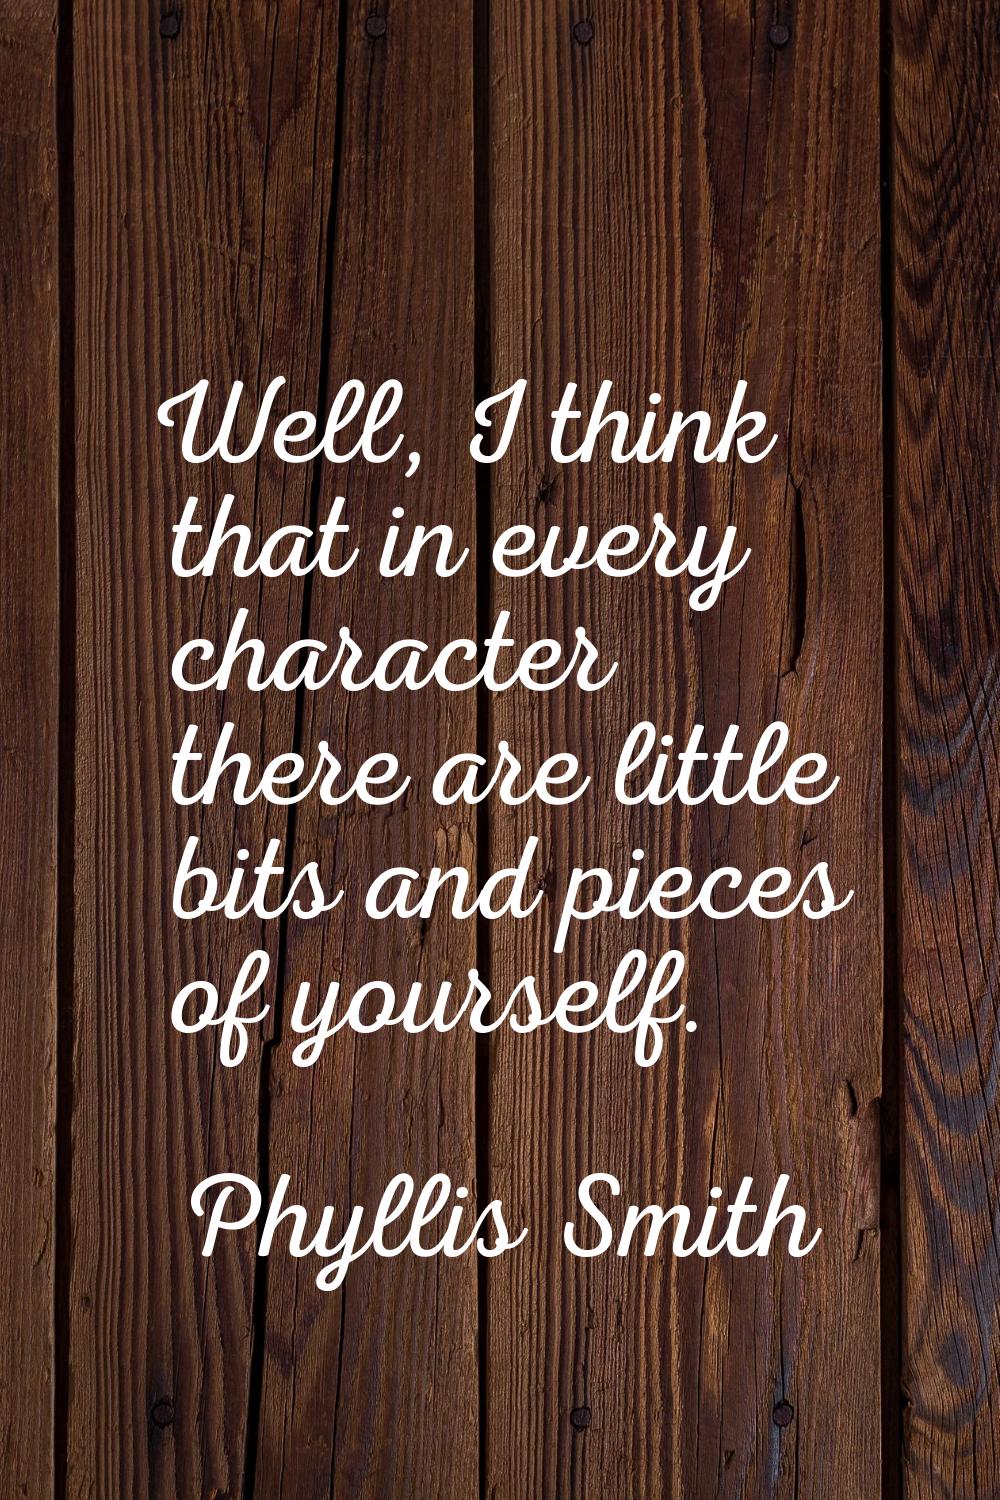 Well, I think that in every character there are little bits and pieces of yourself.